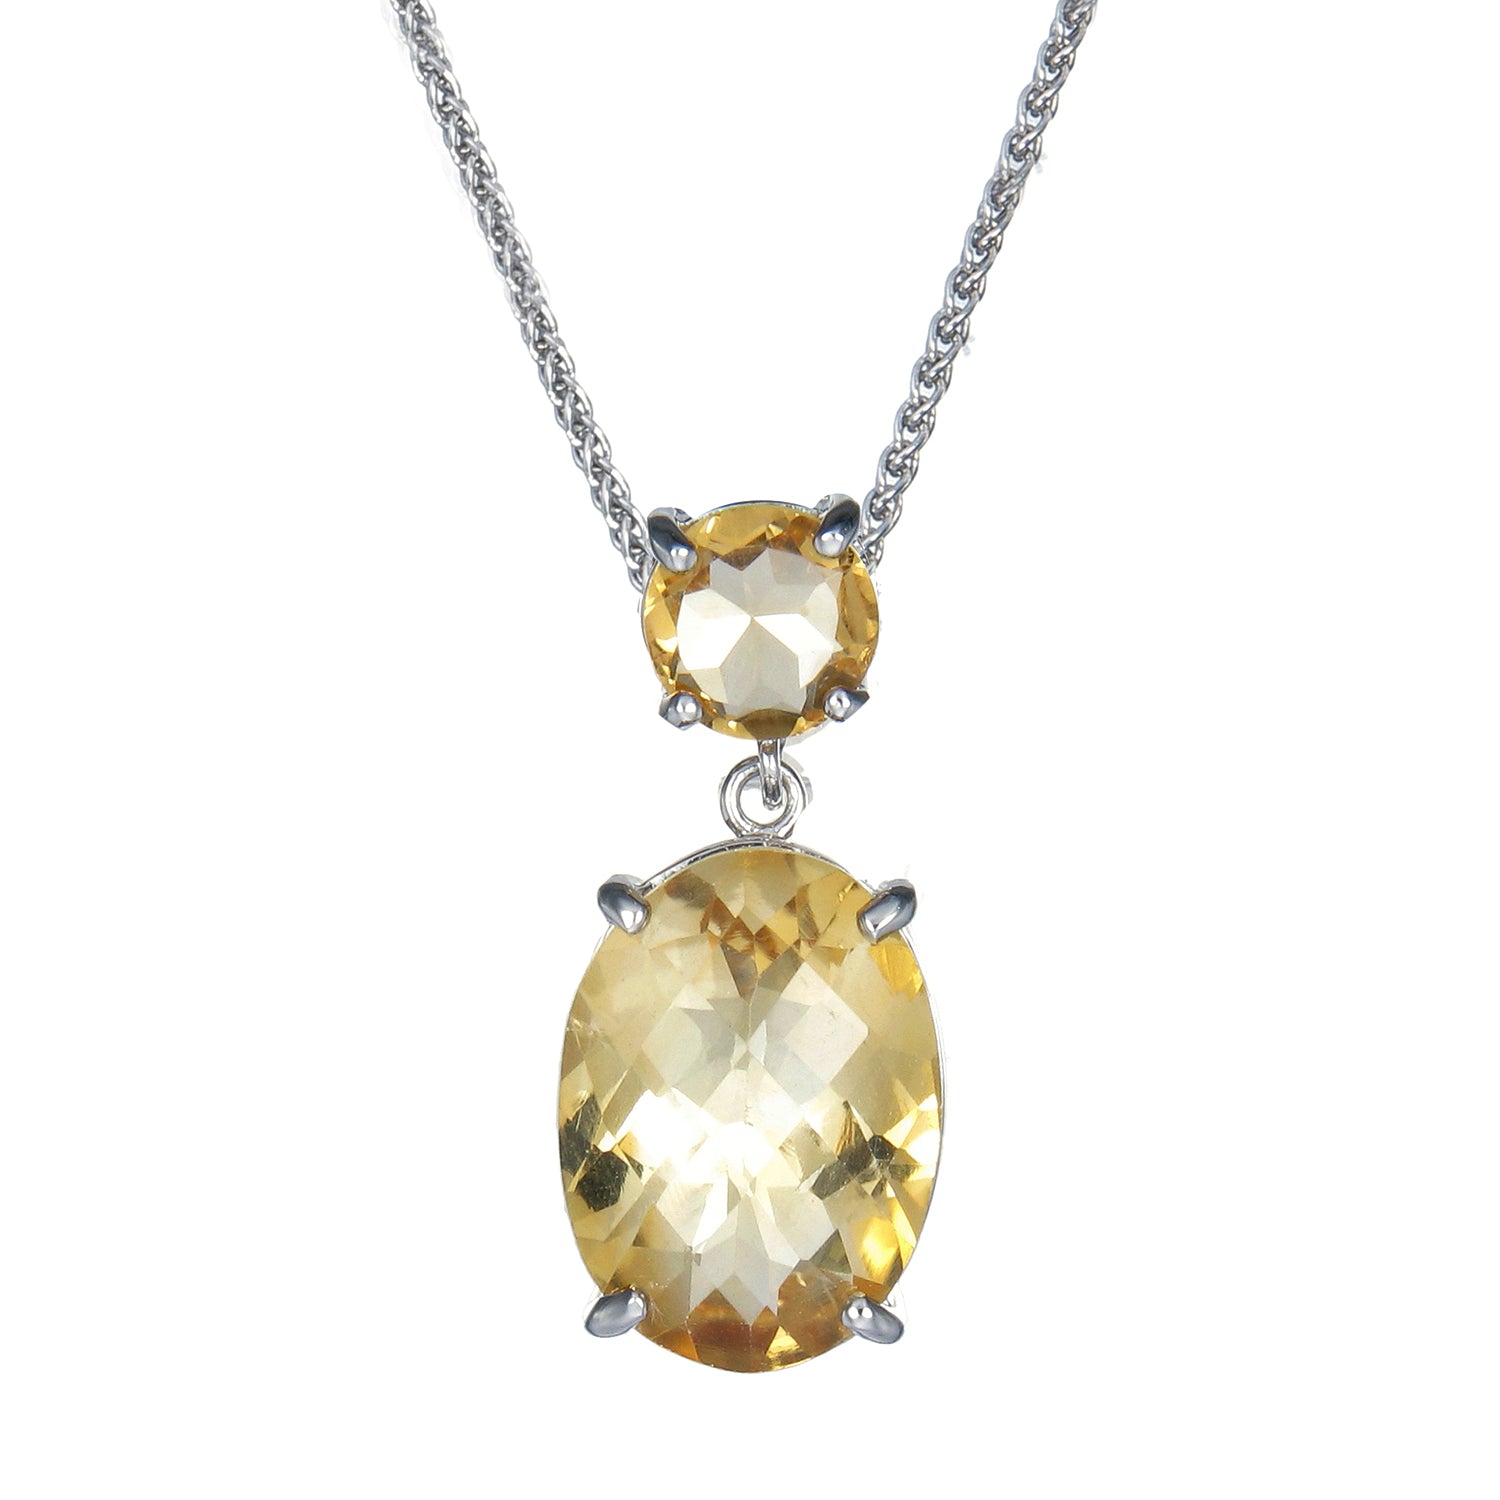 5.5 cttw Pendant Necklace, Citrine Oval Pendant Necklace for Women in .925 Sterling Silver with 18 Inch Chain, Prong Setting